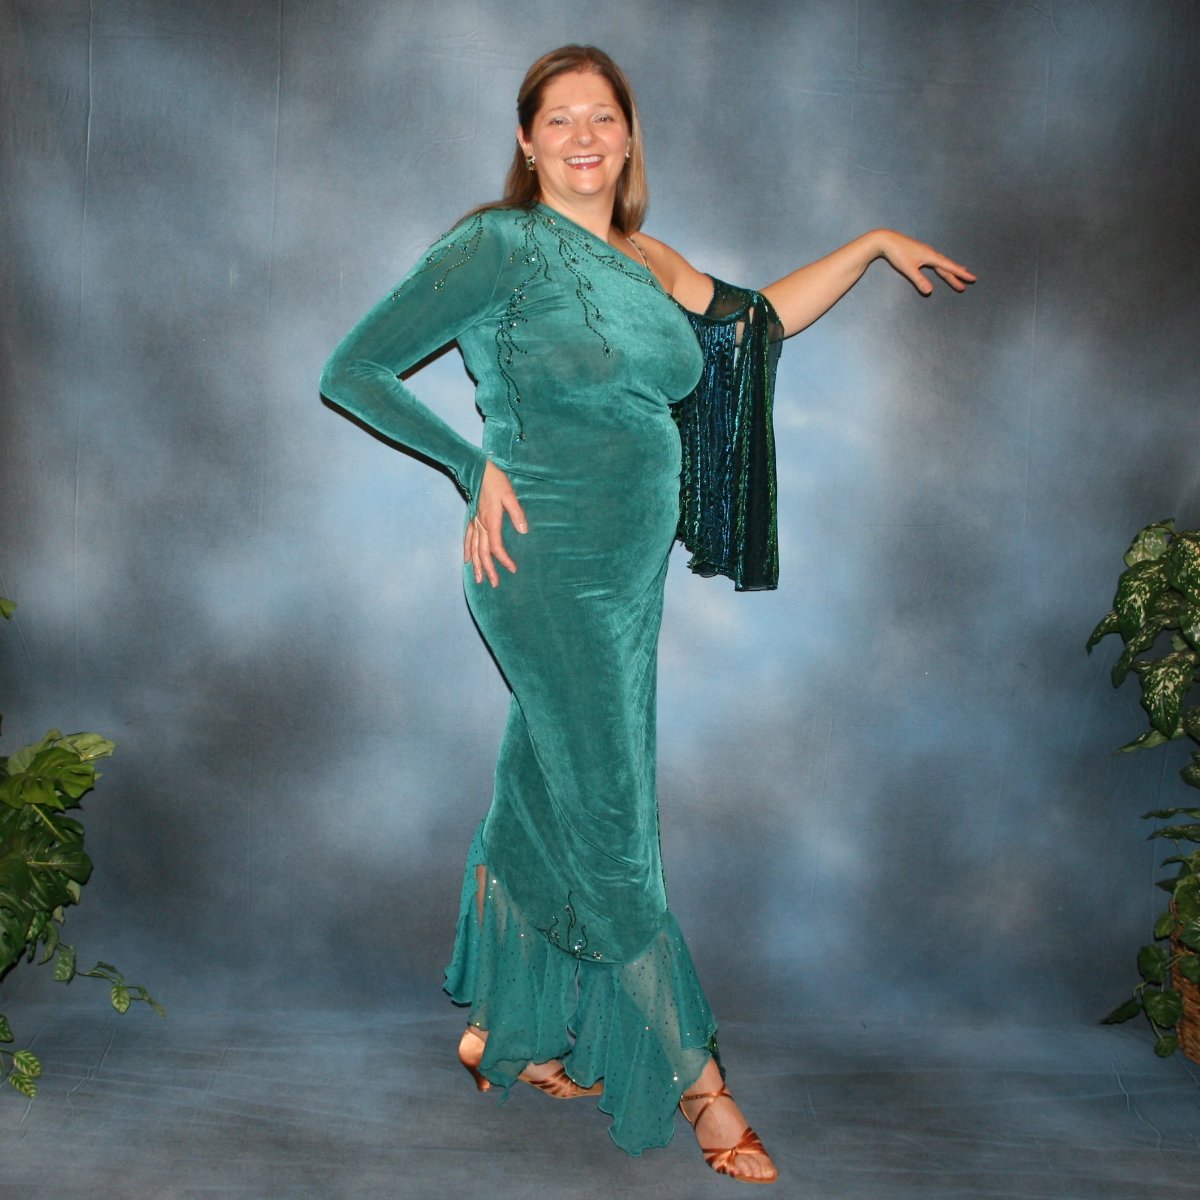 Crystal's Creations side view of Plus size teal Latin/rhythm dress or tango dress was created in luxurious teal solid slinky with iridescent floats & flounces plus a few champagne sequined flounces at bottom skirting. It is embellished with finely detailed Swarovski stonework in blue zircon, blue zircon AB and emerald. green